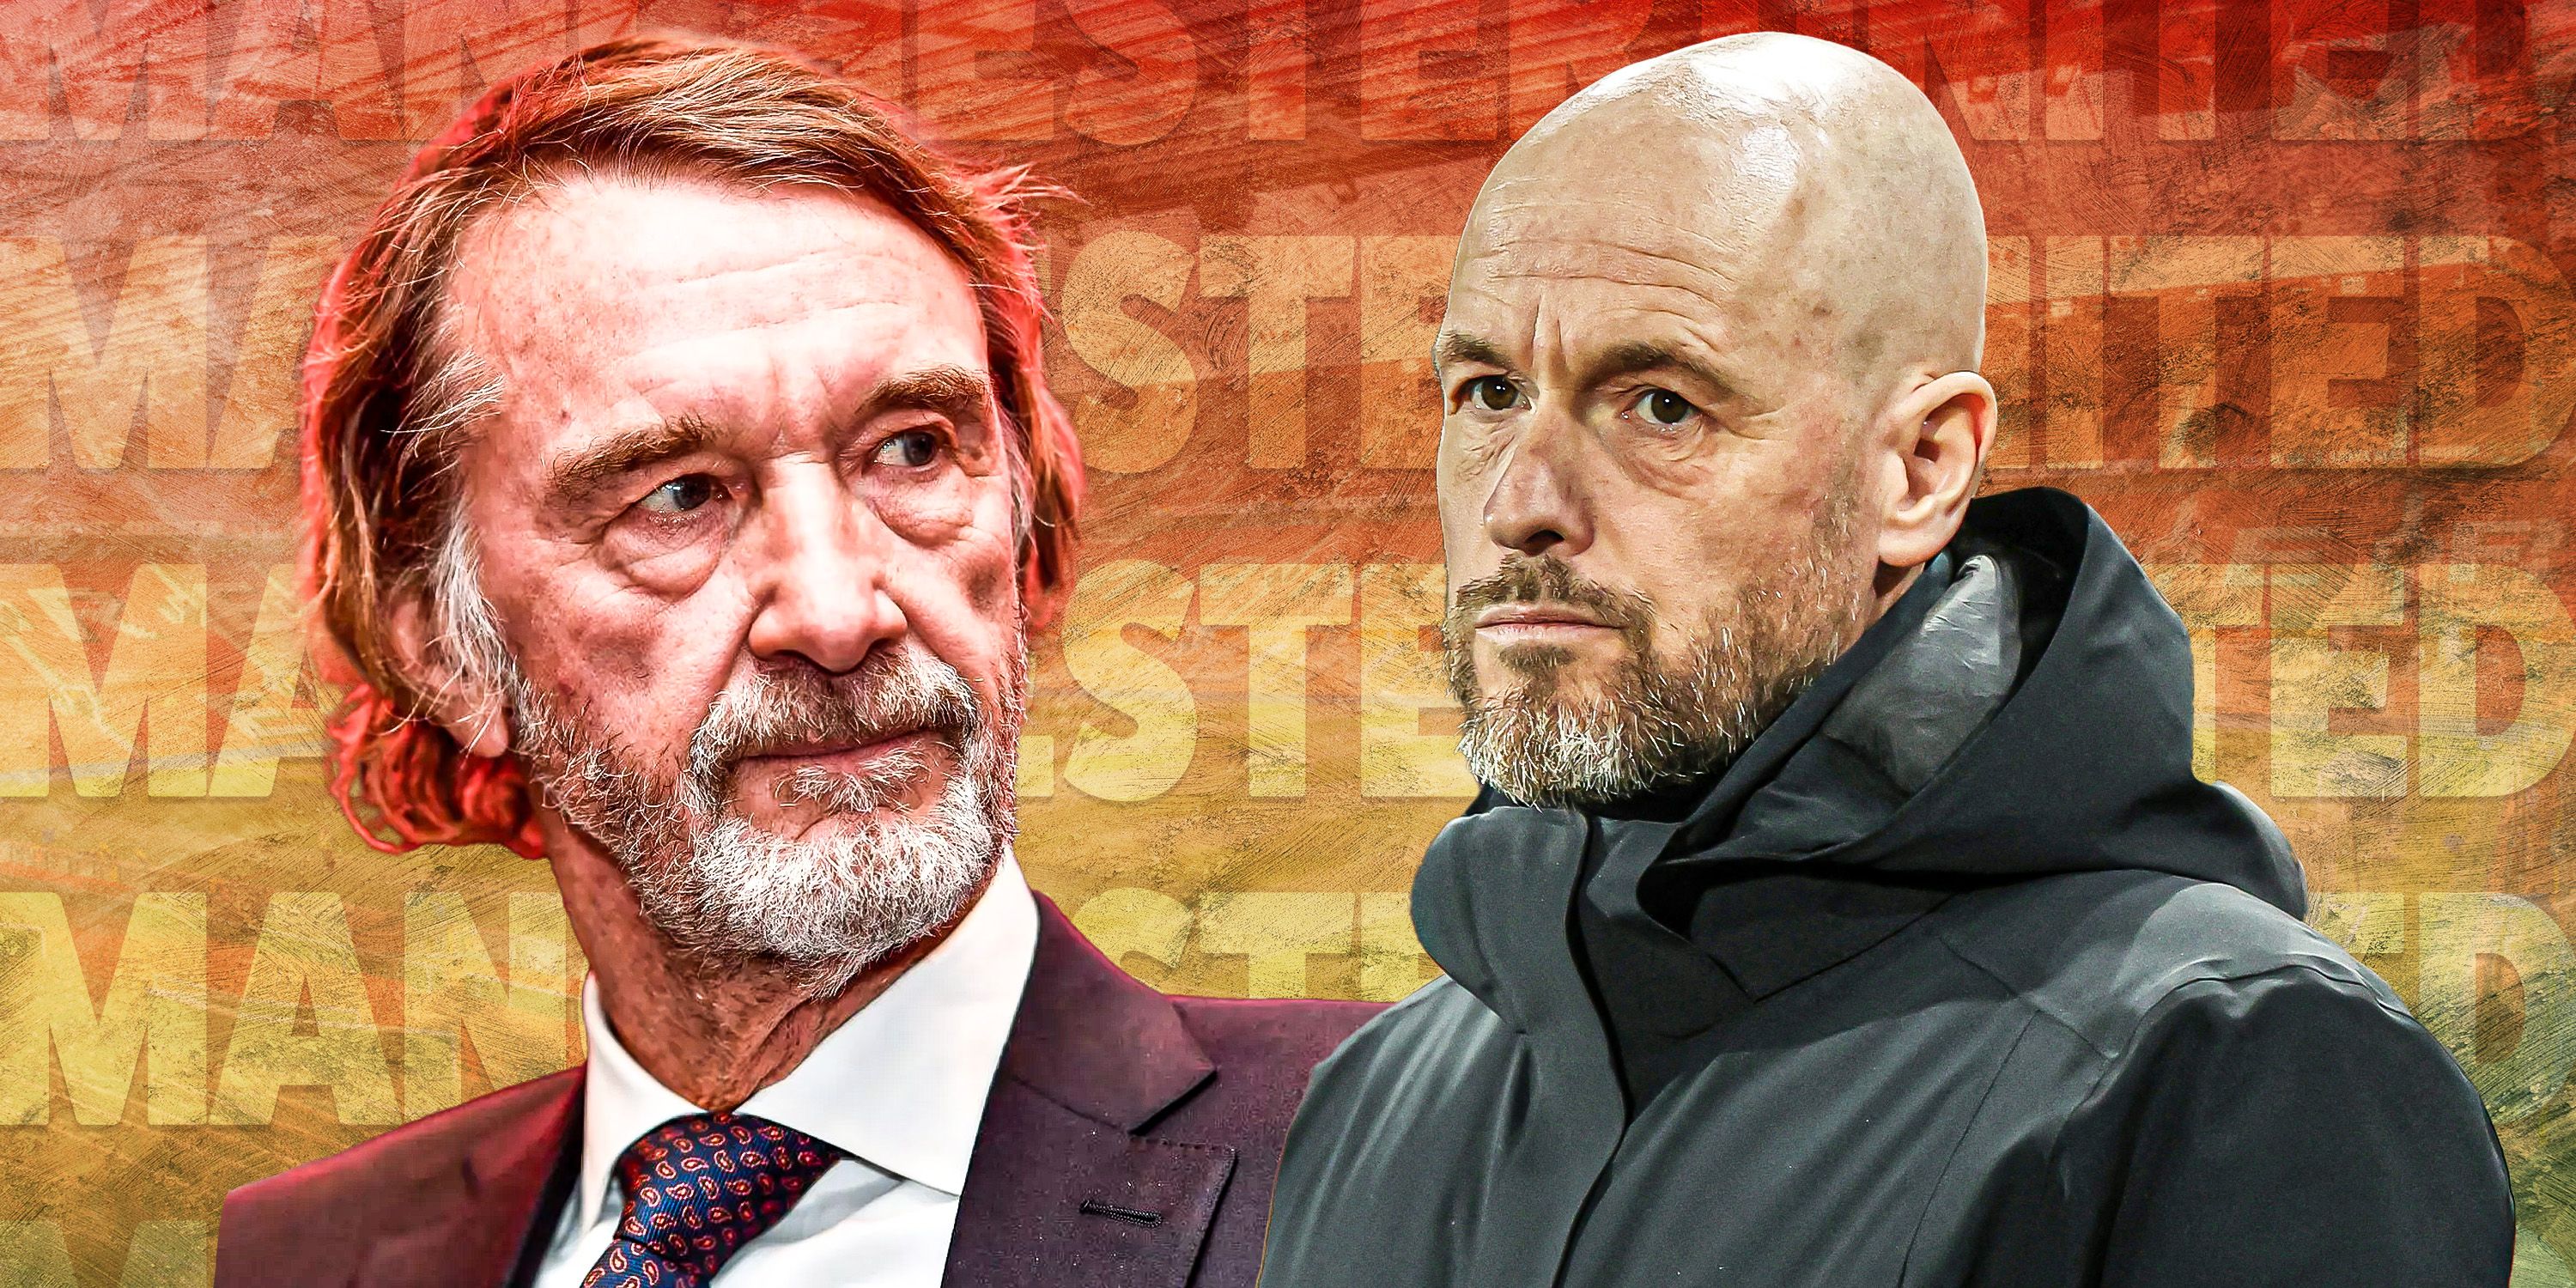 Manchester United co-owner Sir Jim Ratcliffe and boss Erik ten Hag